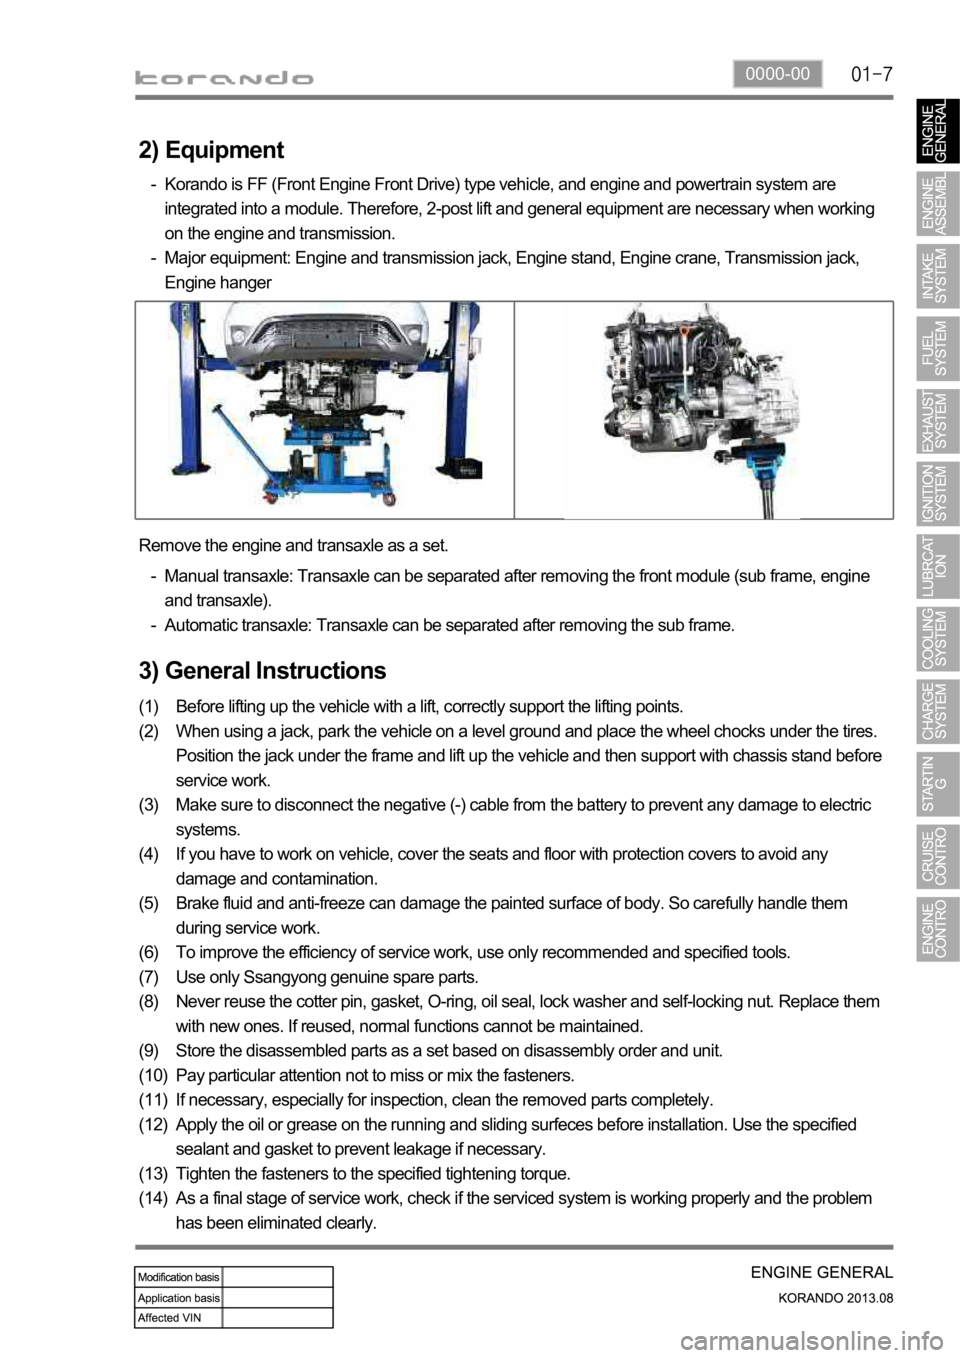 SSANGYONG KORANDO 2013  Service Manual 0000-00
3) General Instructions
Before lifting up the vehicle with a lift, correctly support the lifting points.
When using a jack, park the vehicle on a level ground and place the wheel chocks under 